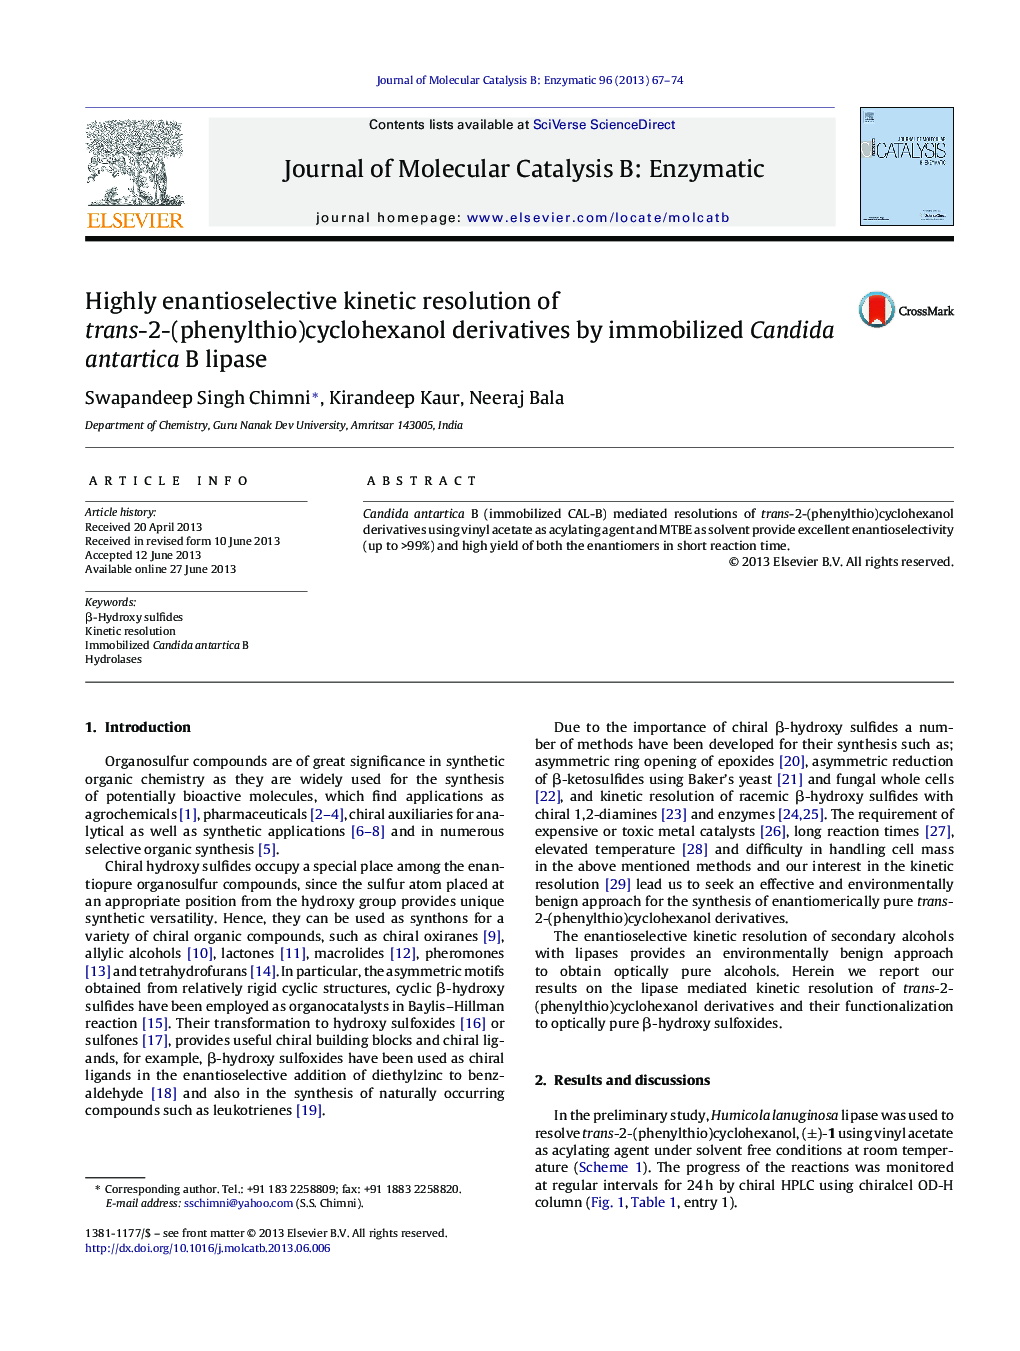 Highly enantioselective kinetic resolution of trans-2-(phenylthio)cyclohexanol derivatives by immobilized Candida antartica B lipase